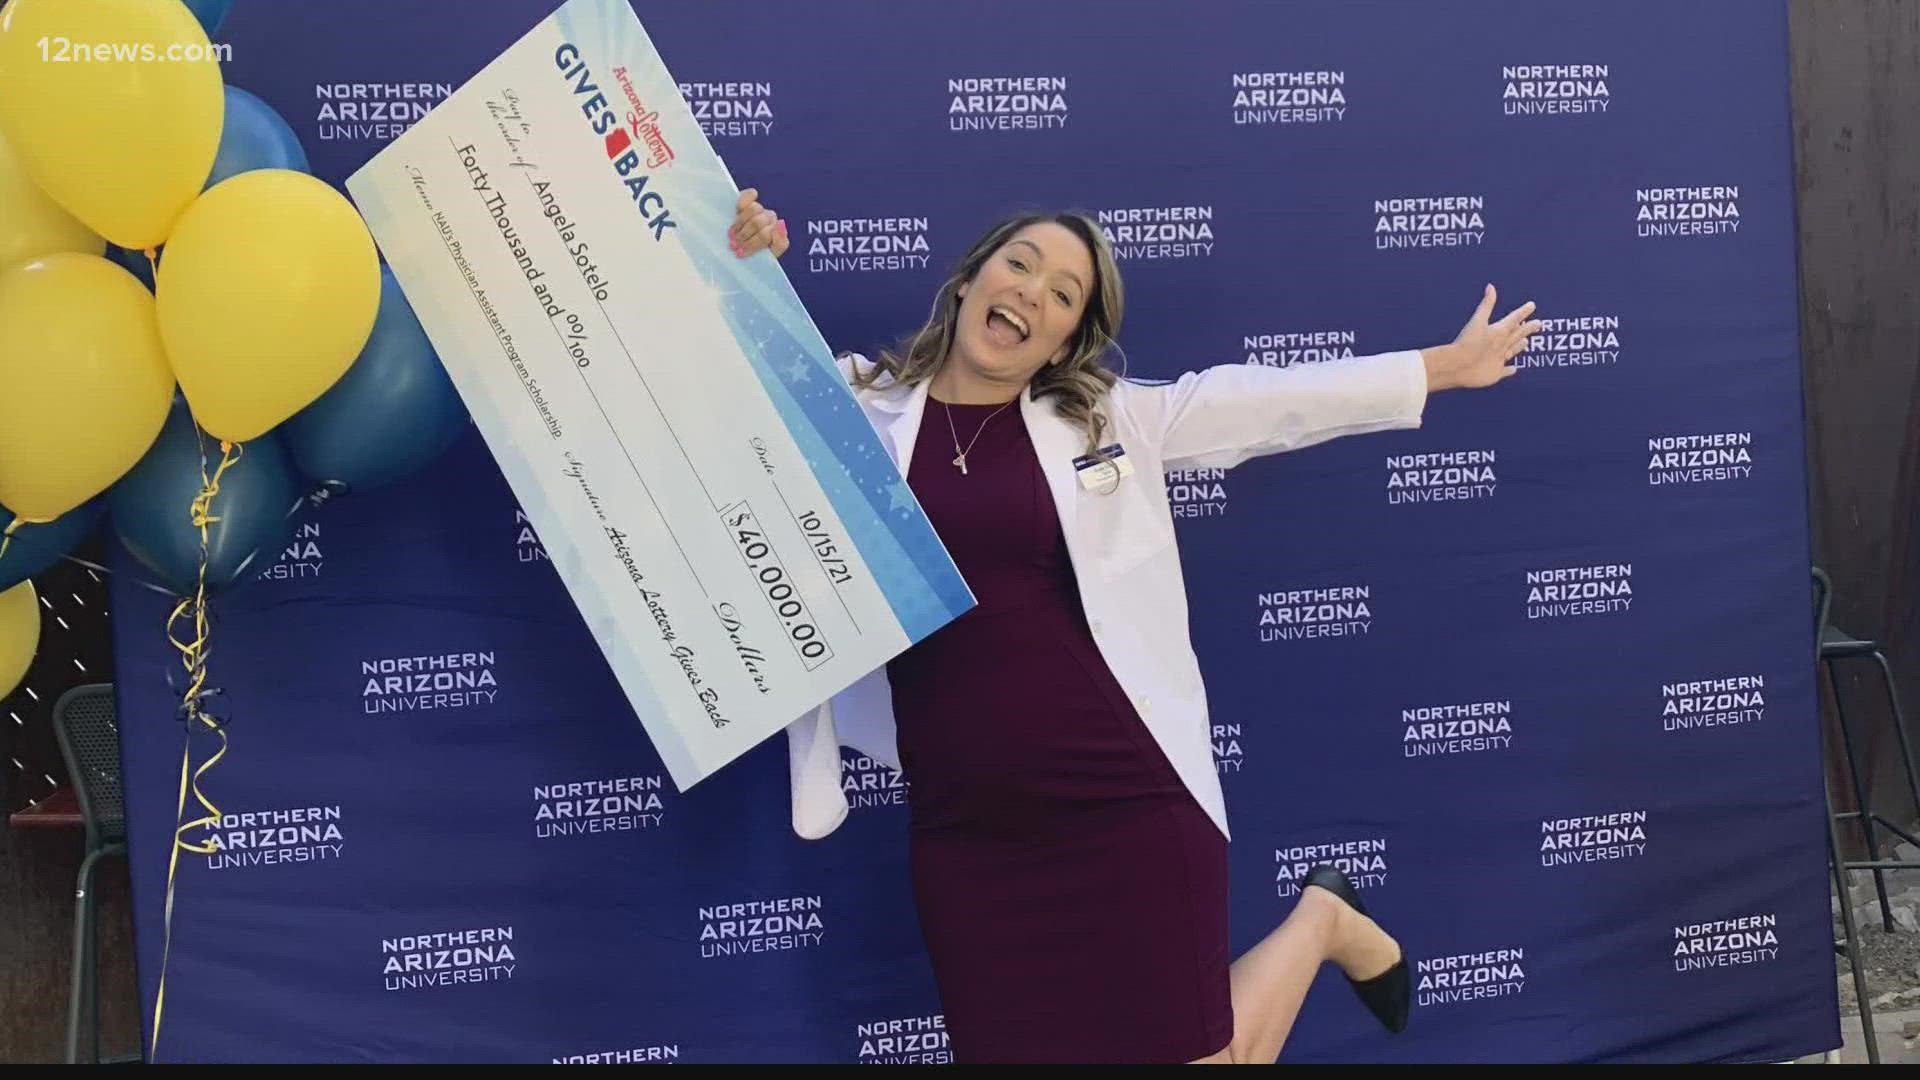 Angela Sotelo is studying to become a Physician’s Assistant in downtown Phoenix. She received a $40,000 check from the Arizona Lottery to help pay for her schooling.